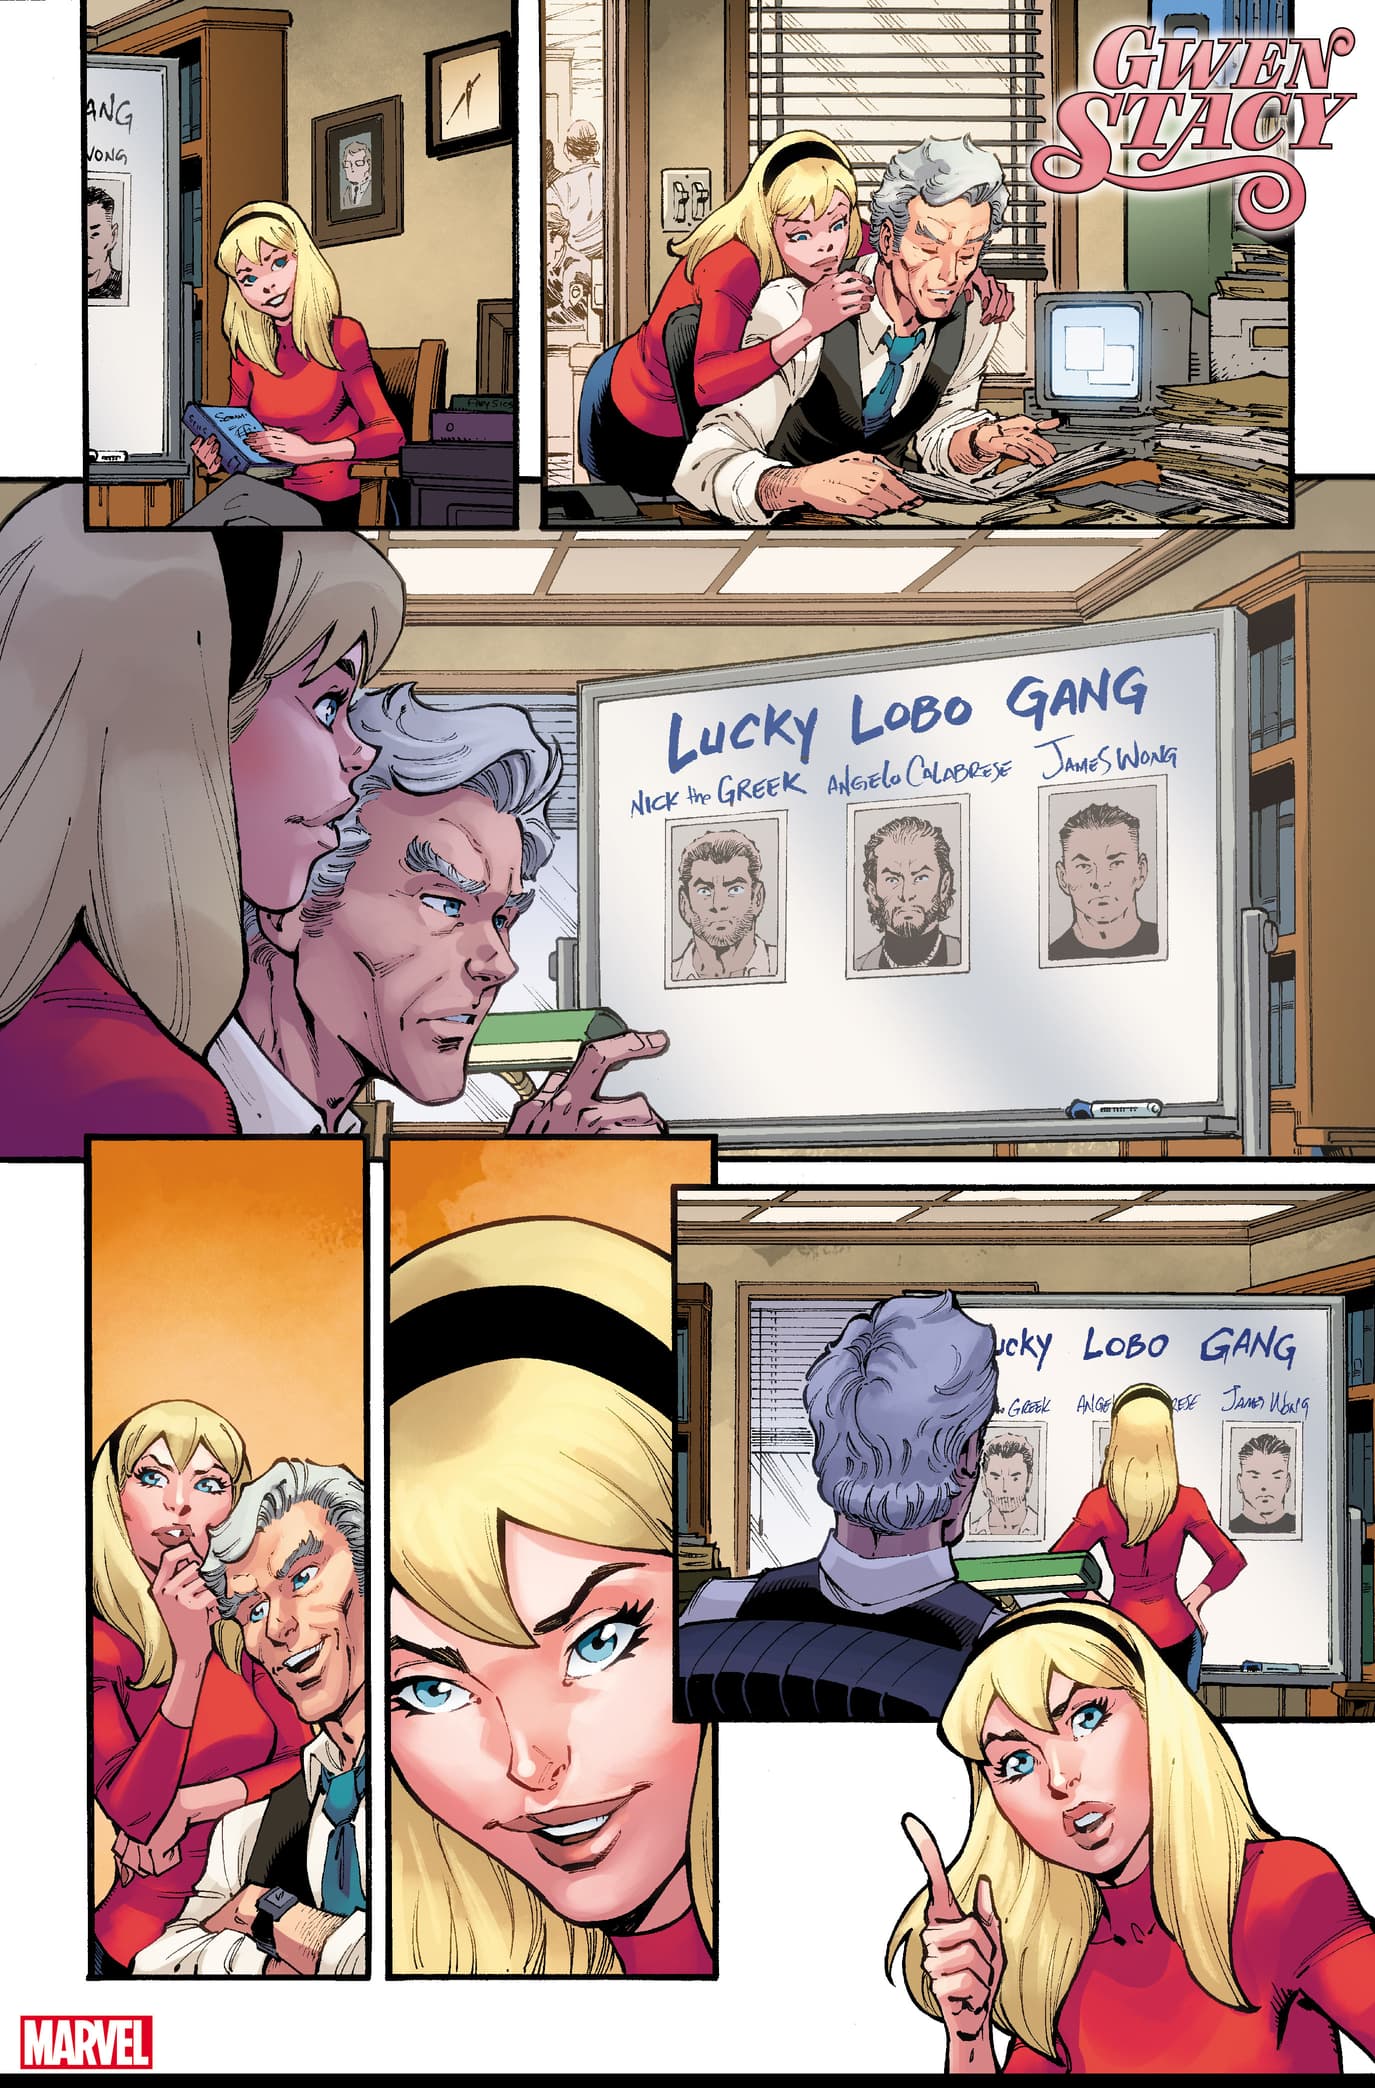 Gwen Stacy preview art